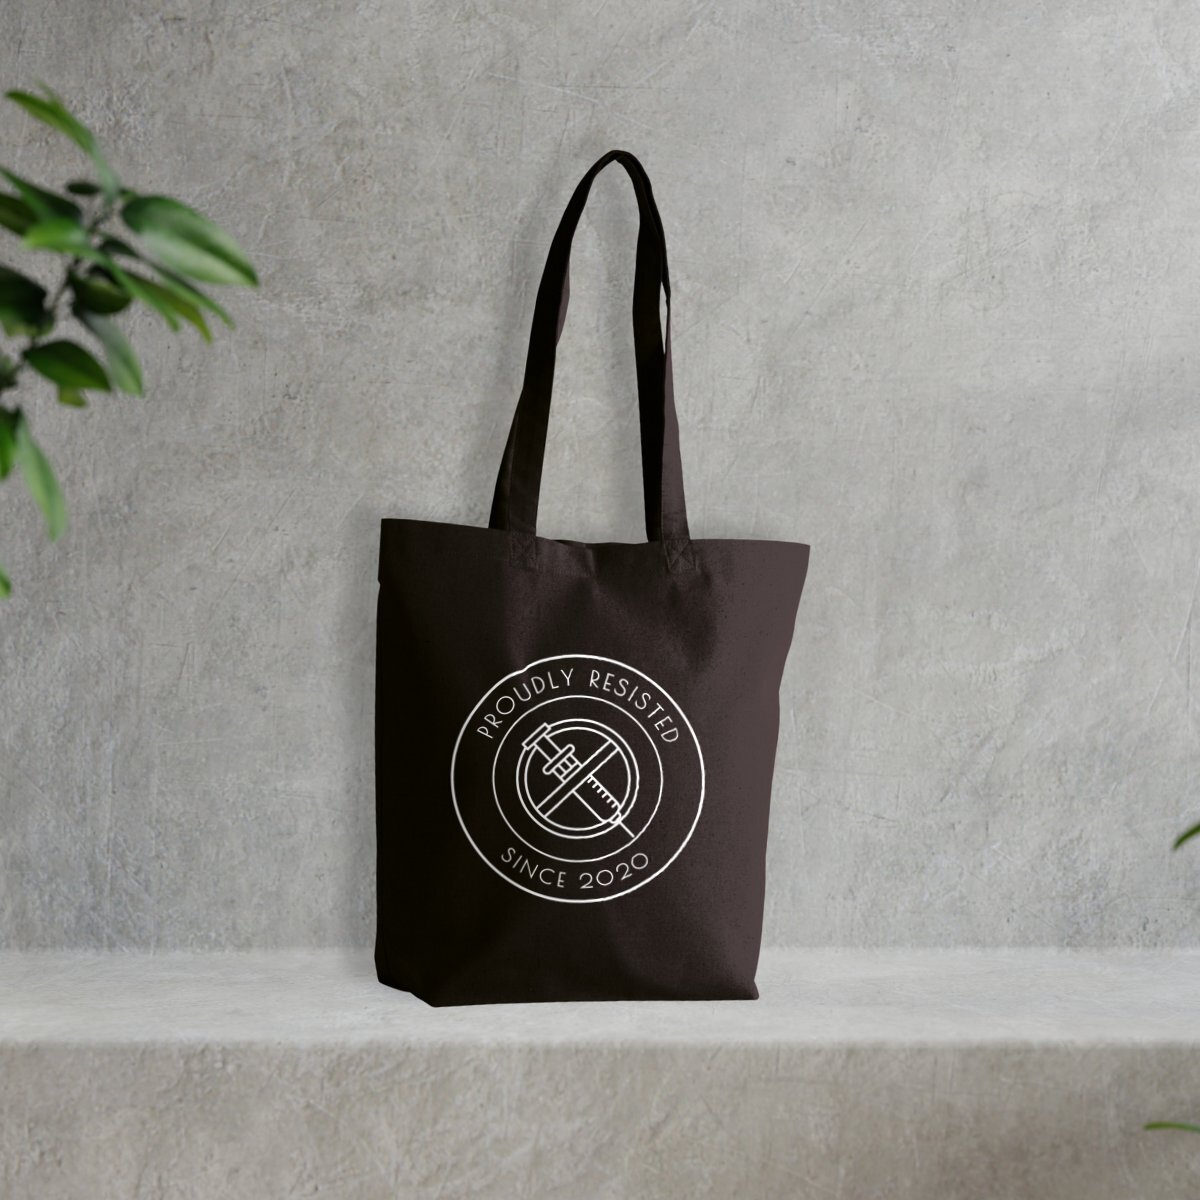 Proudly resisted since 2020 Sac Tote